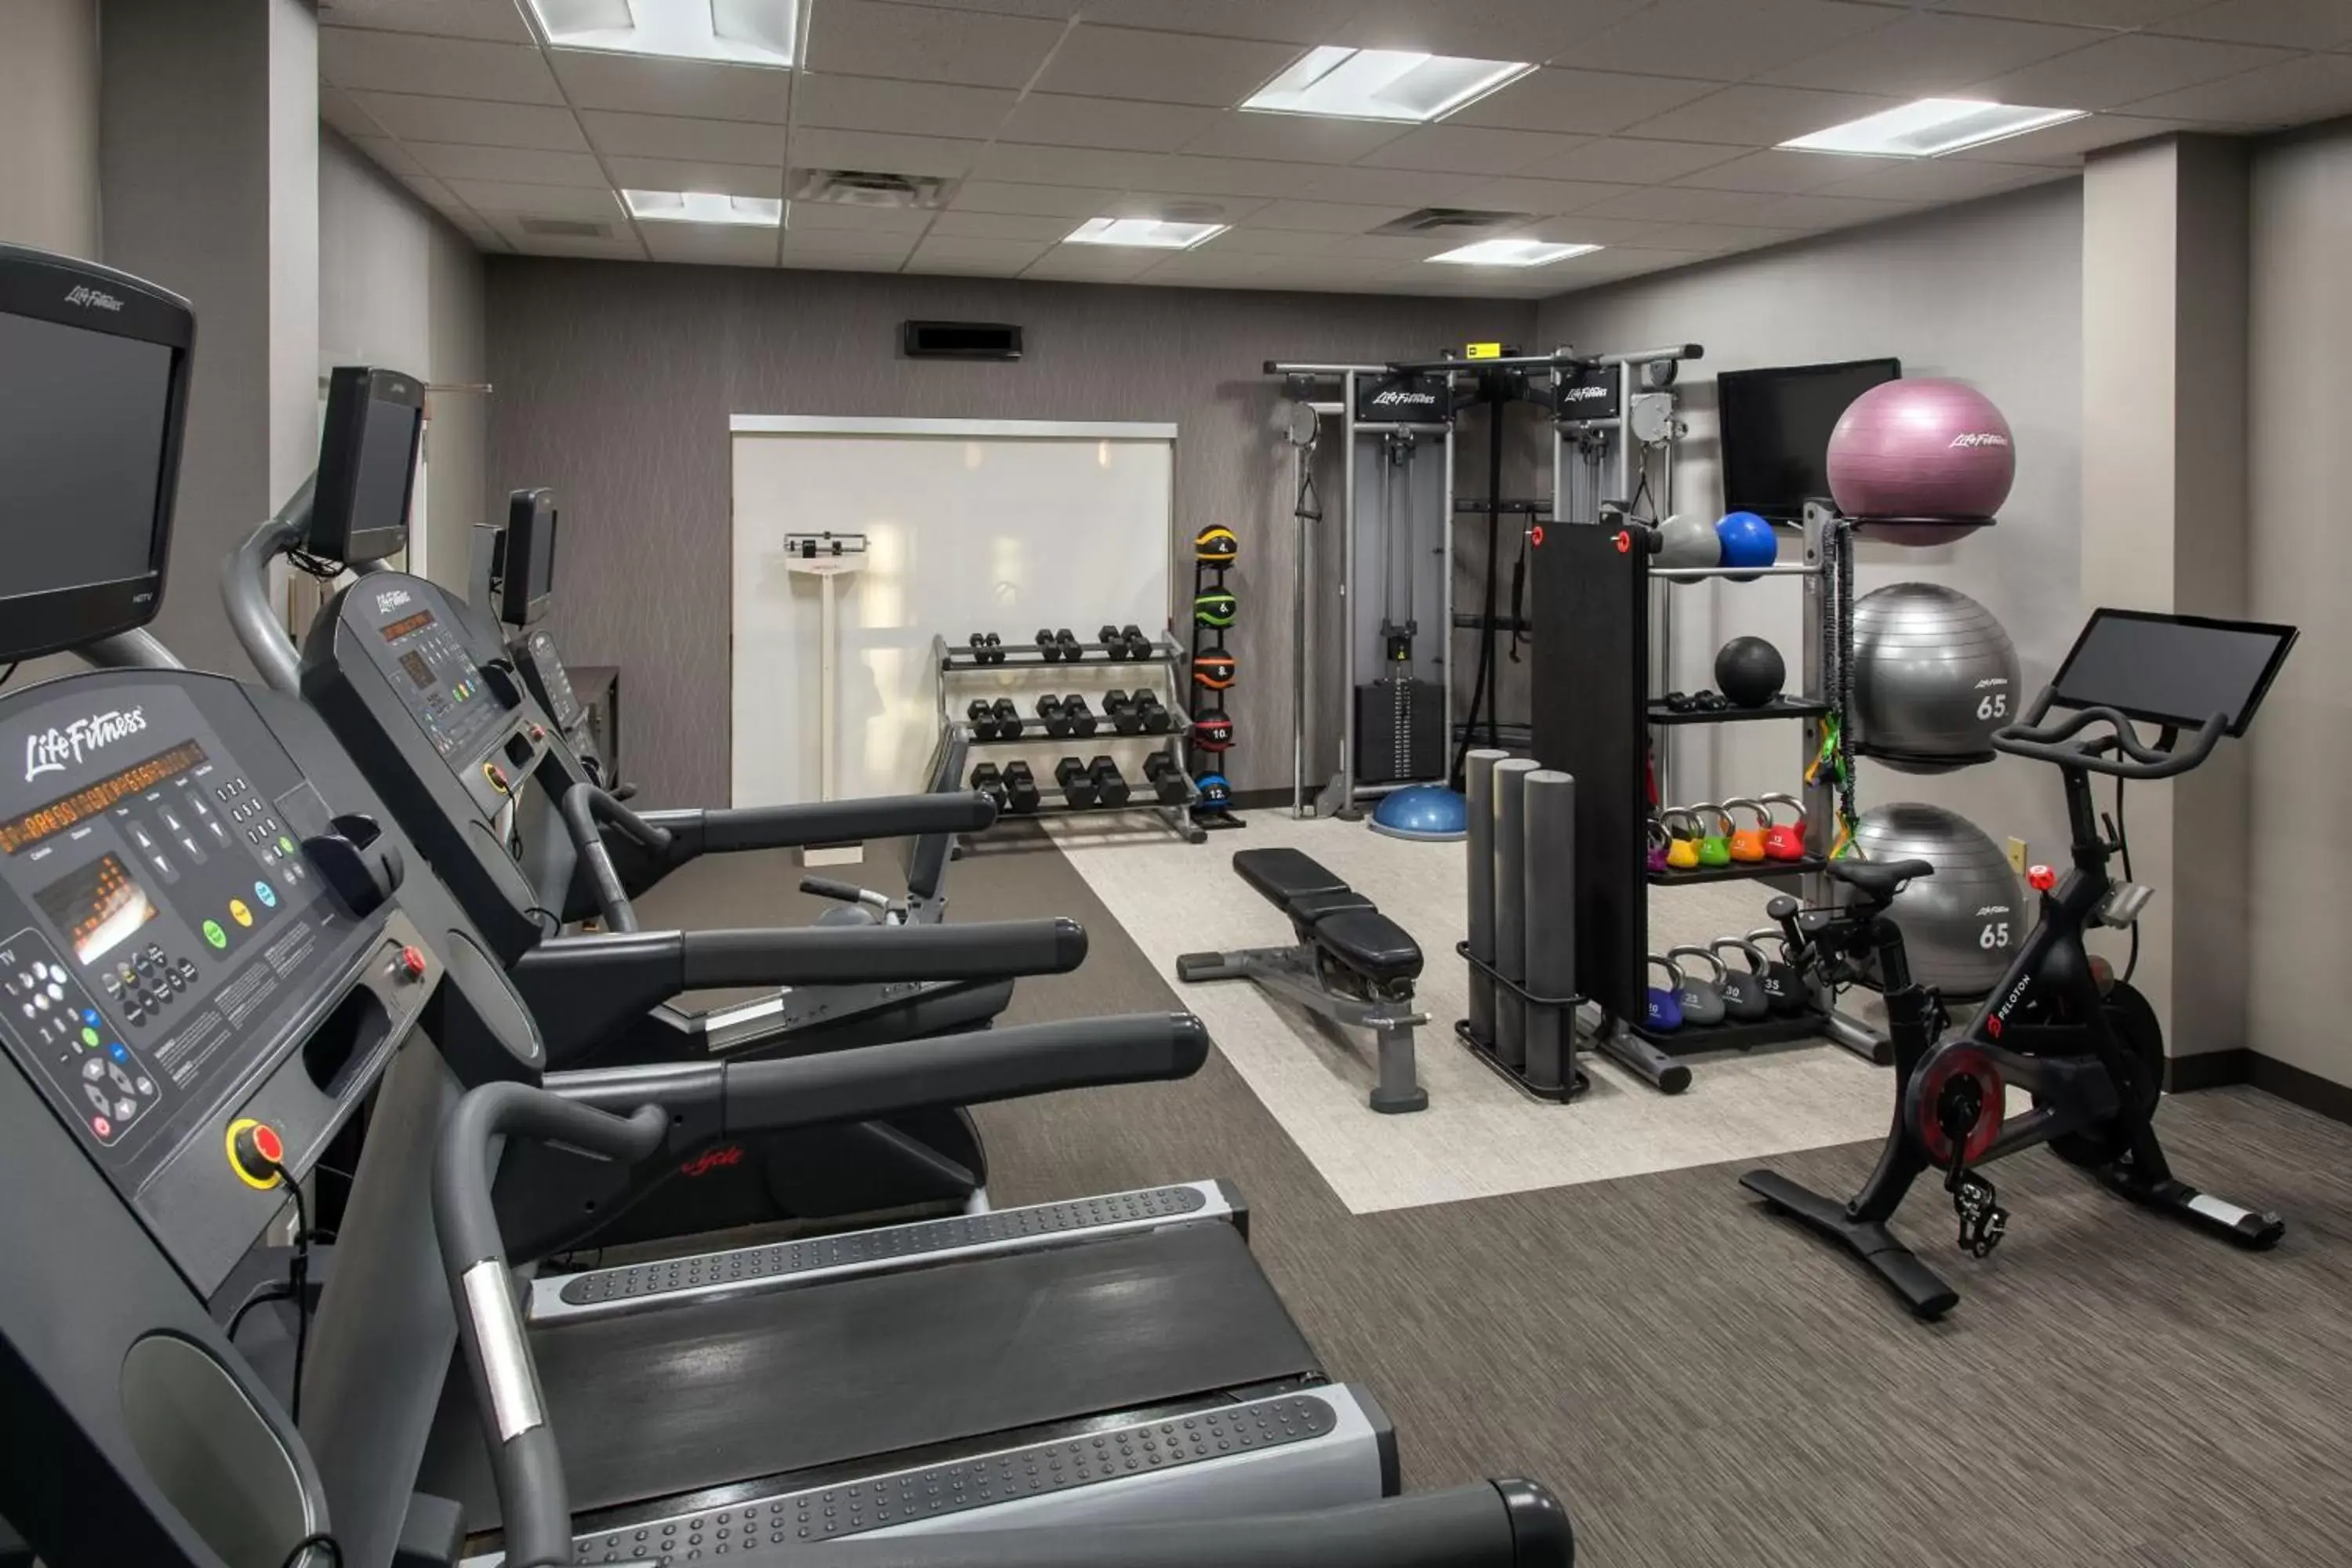 Fitness centre/facilities, Fitness Center/Facilities in Courtyard by Marriott Basking Ridge